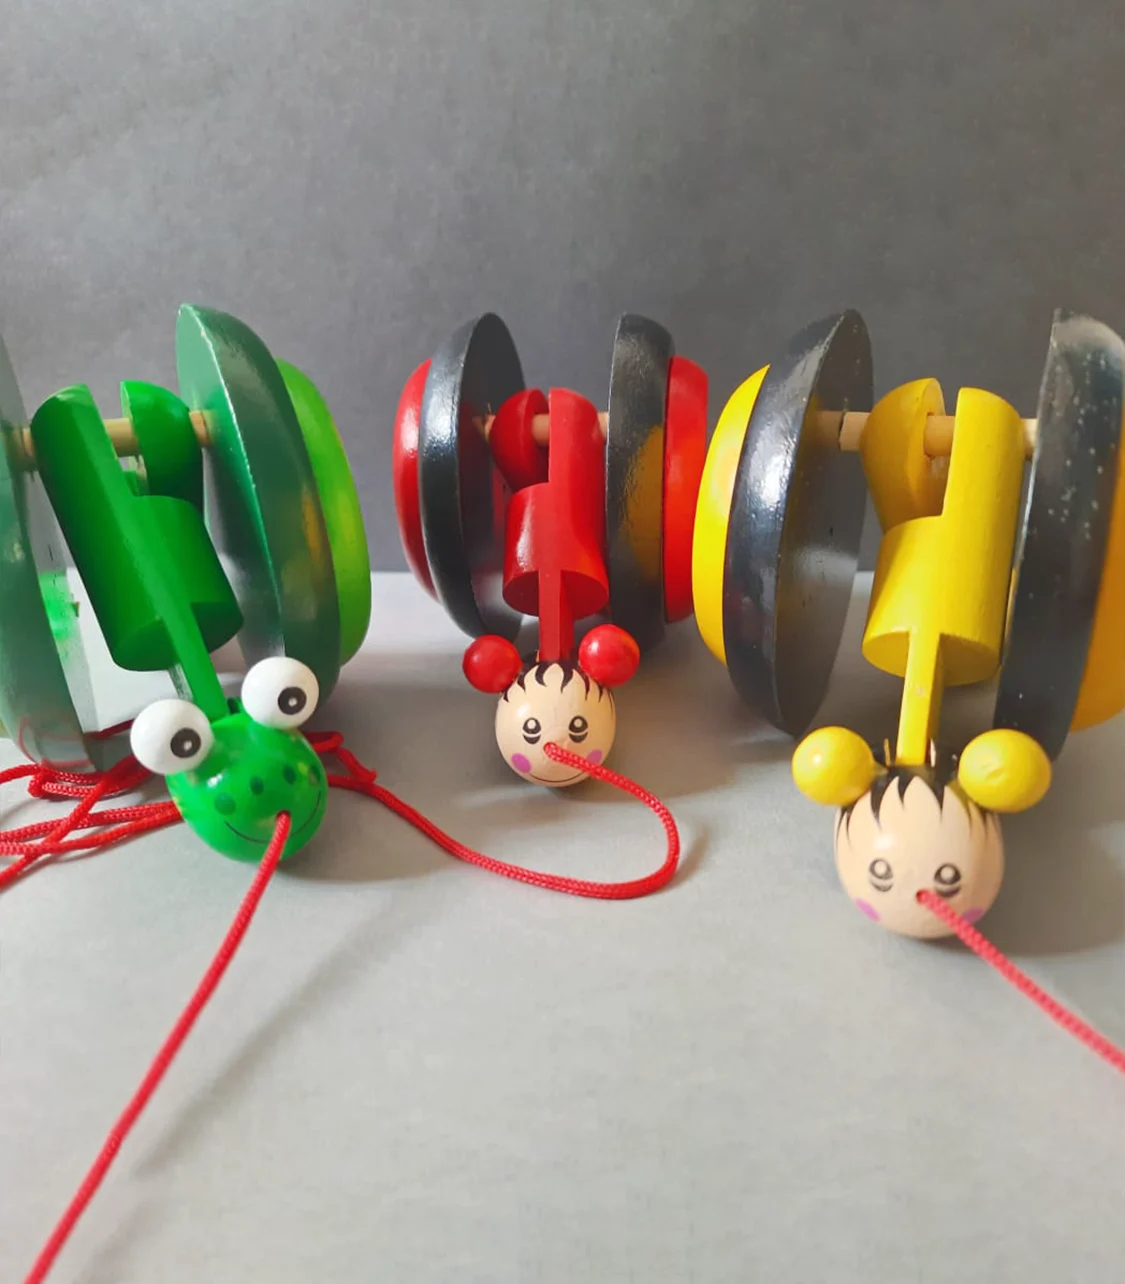 Handmade Wooden PULL ALONG SNAIL Toy - Fun for kids